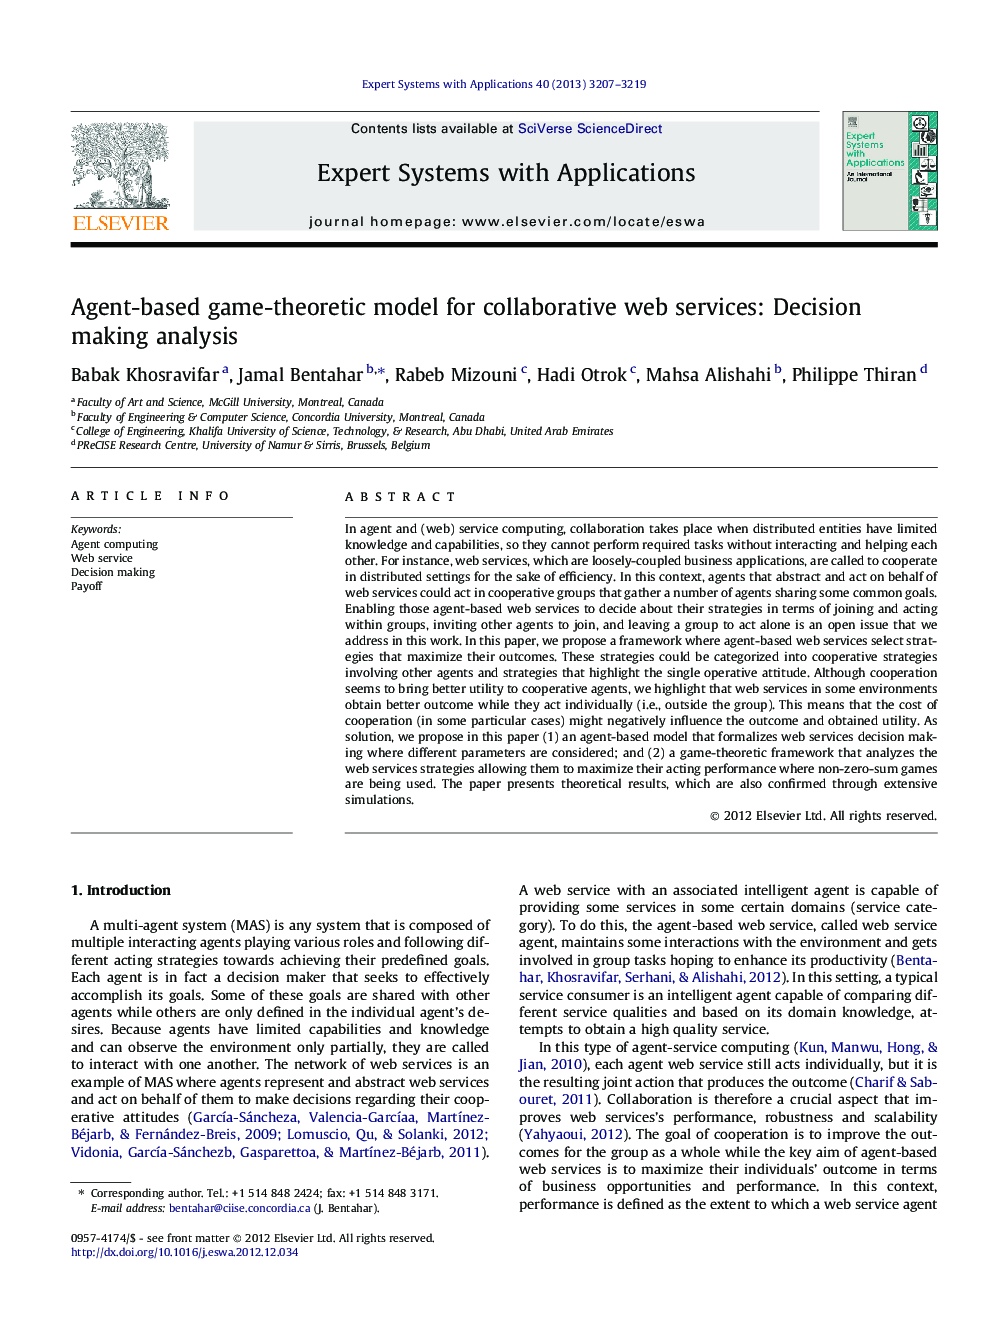 Agent-based game-theoretic model for collaborative web services: Decision making analysis